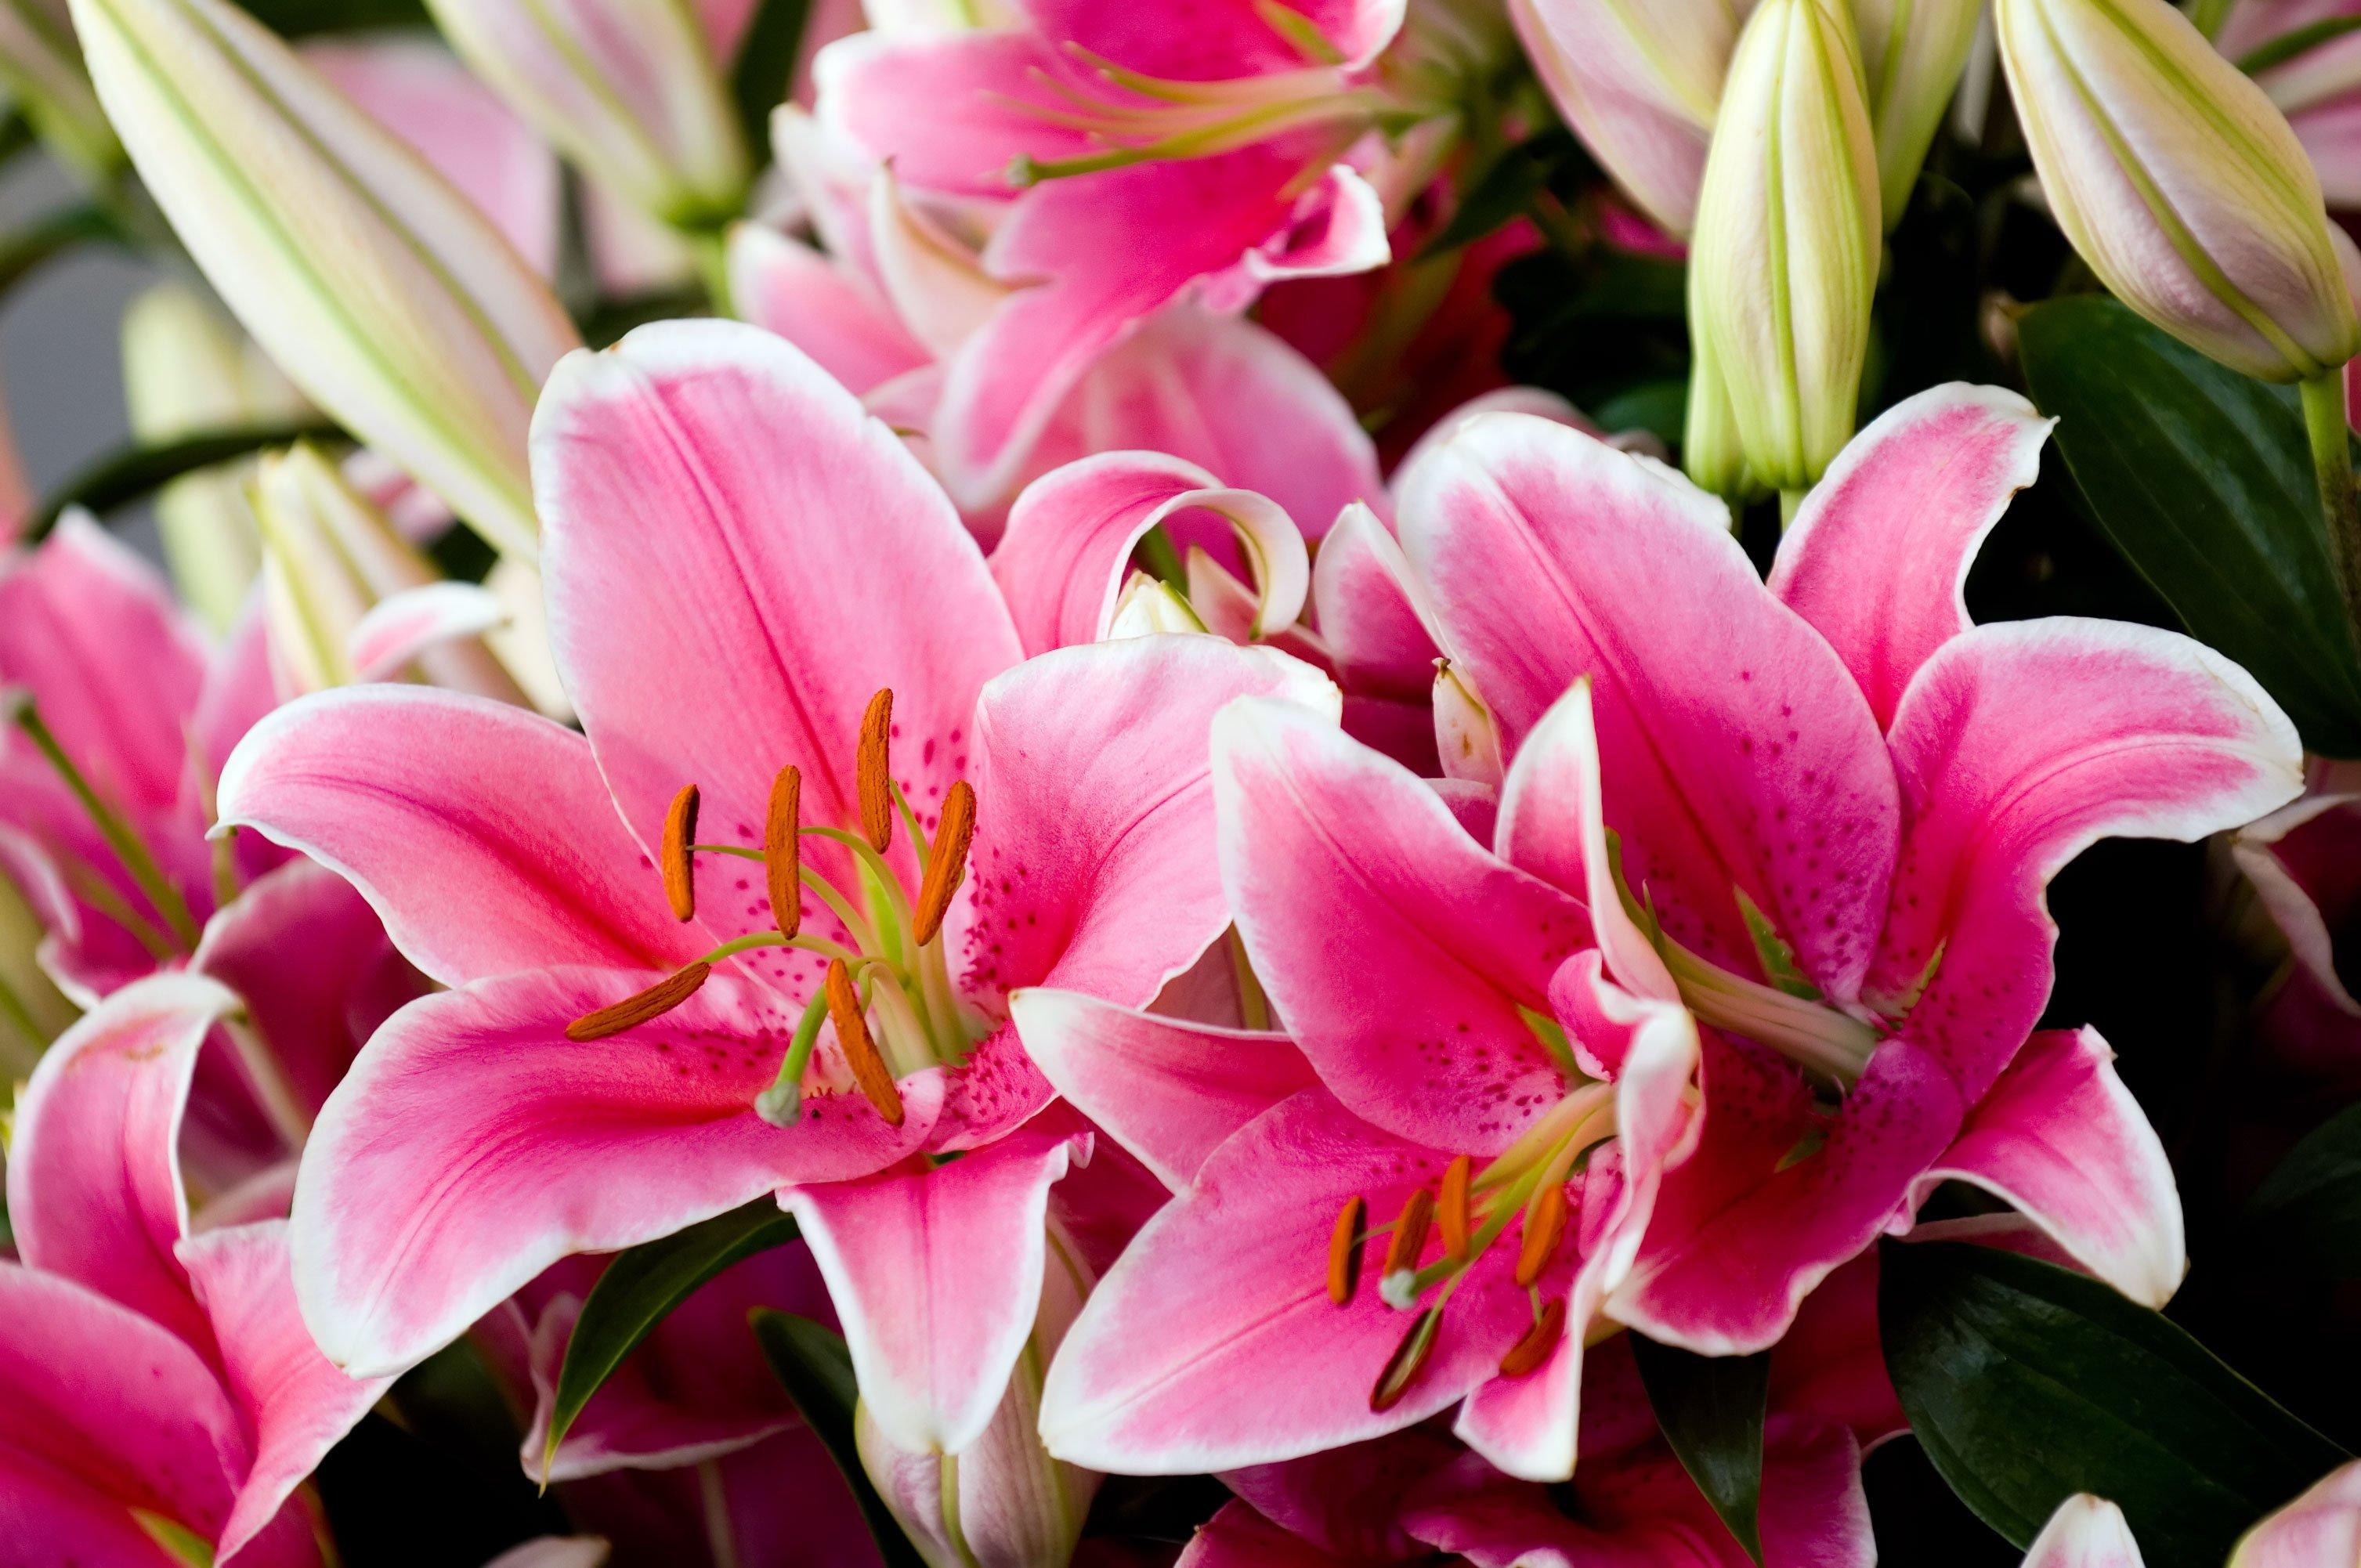 How To Grow And Care For The Crinum Lily